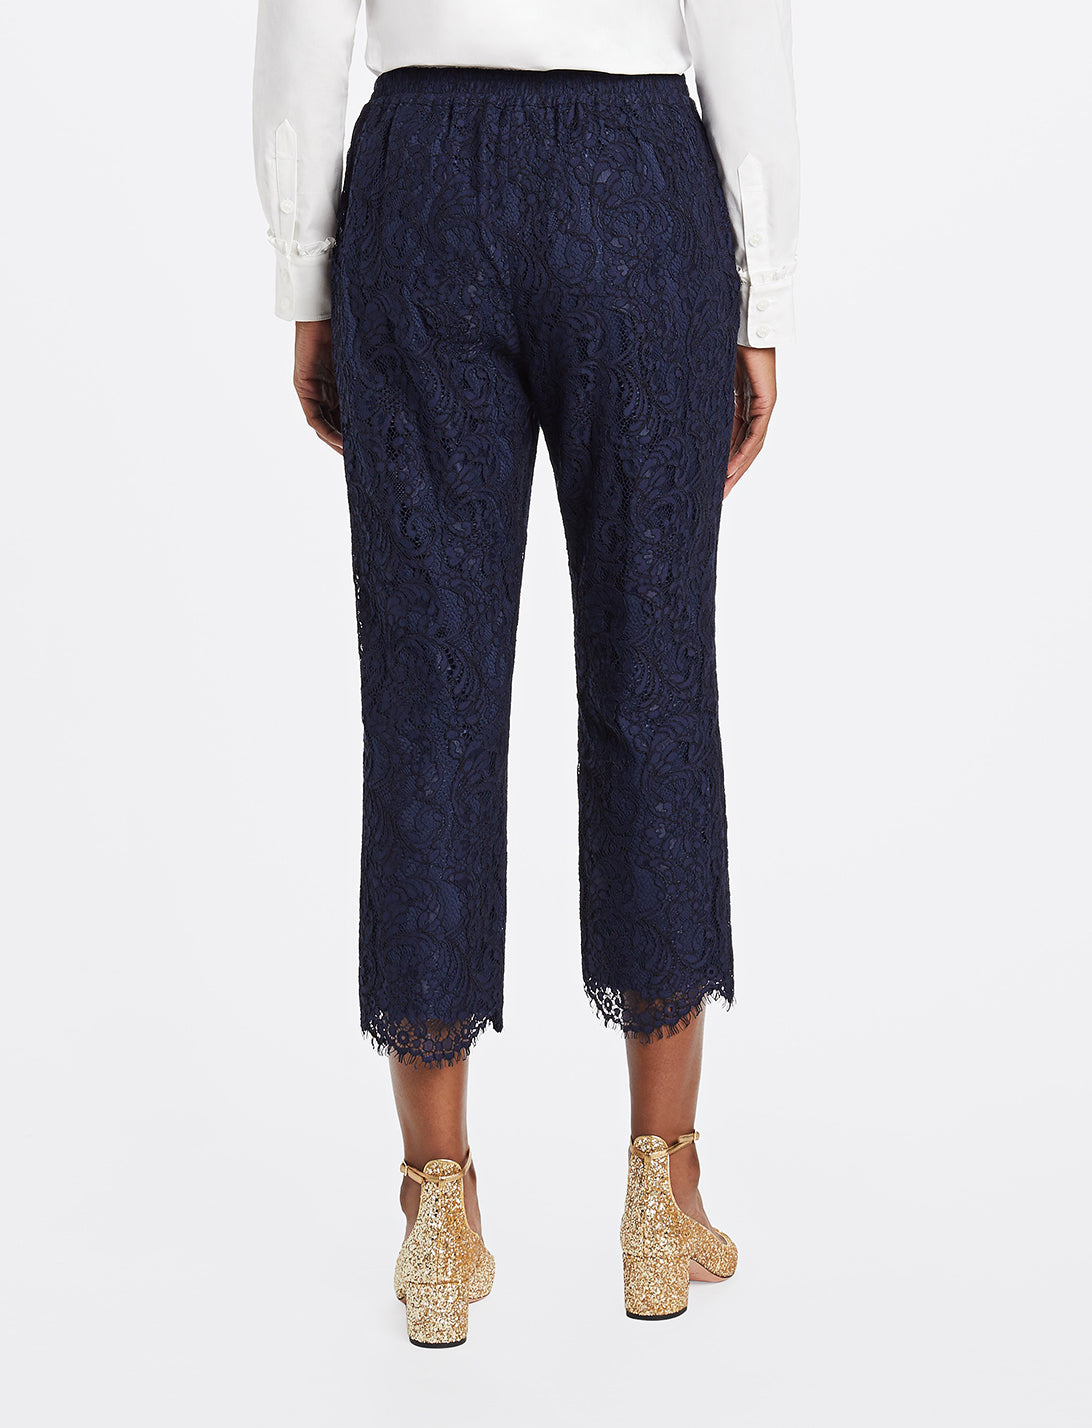 Pull On Lace Pant